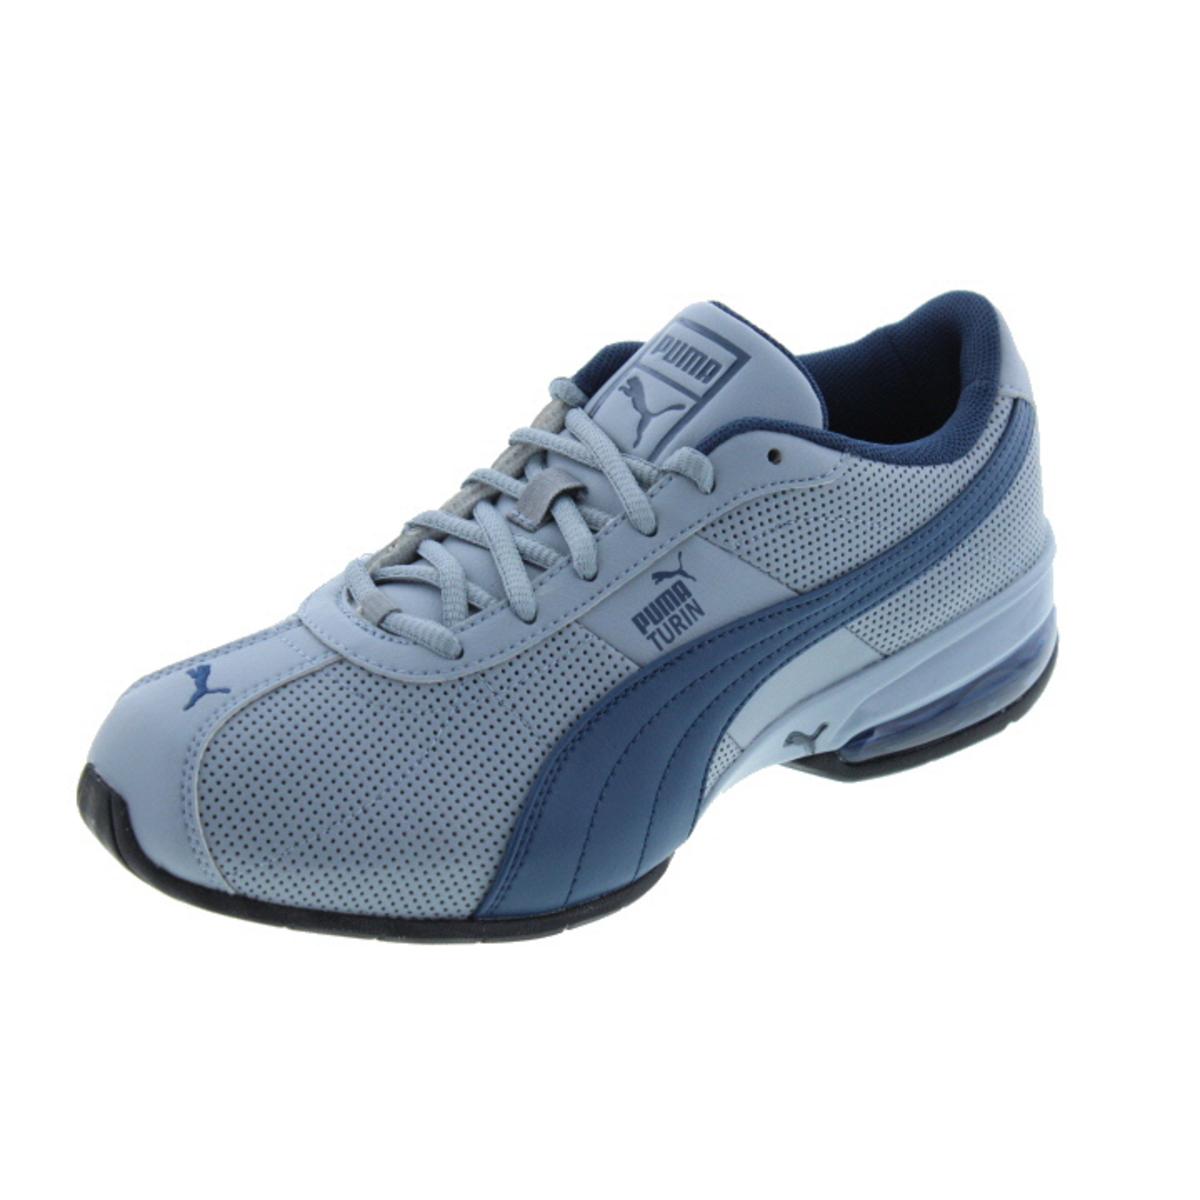 Puma 6438 Mens Cell Turin Perf Running, Cross Training Shoes Athletic ...